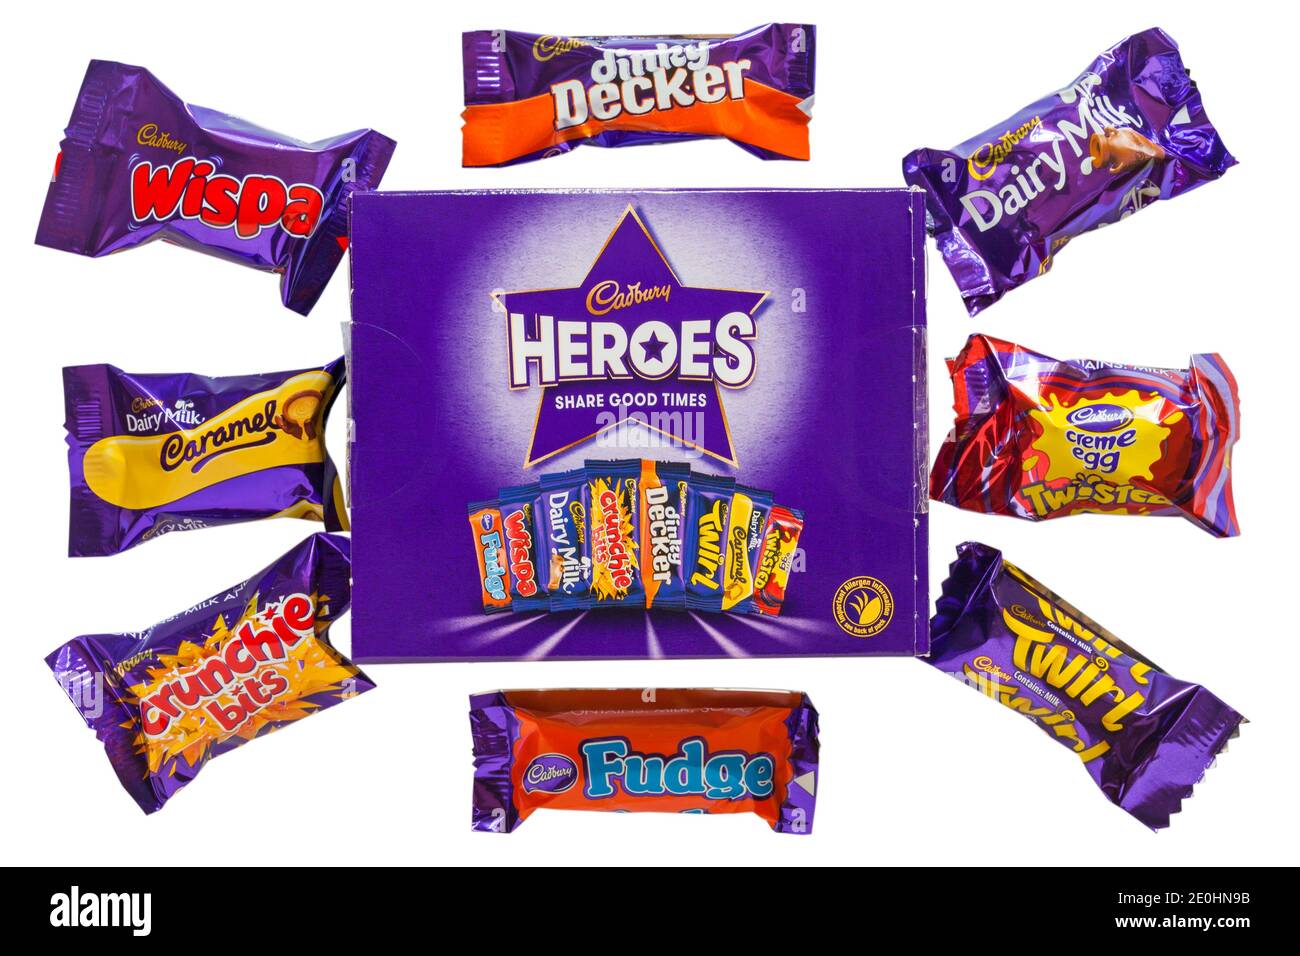 Box Of Cadbury Heroes Chocolates With Contents Removed Isolated On White Background Share Good